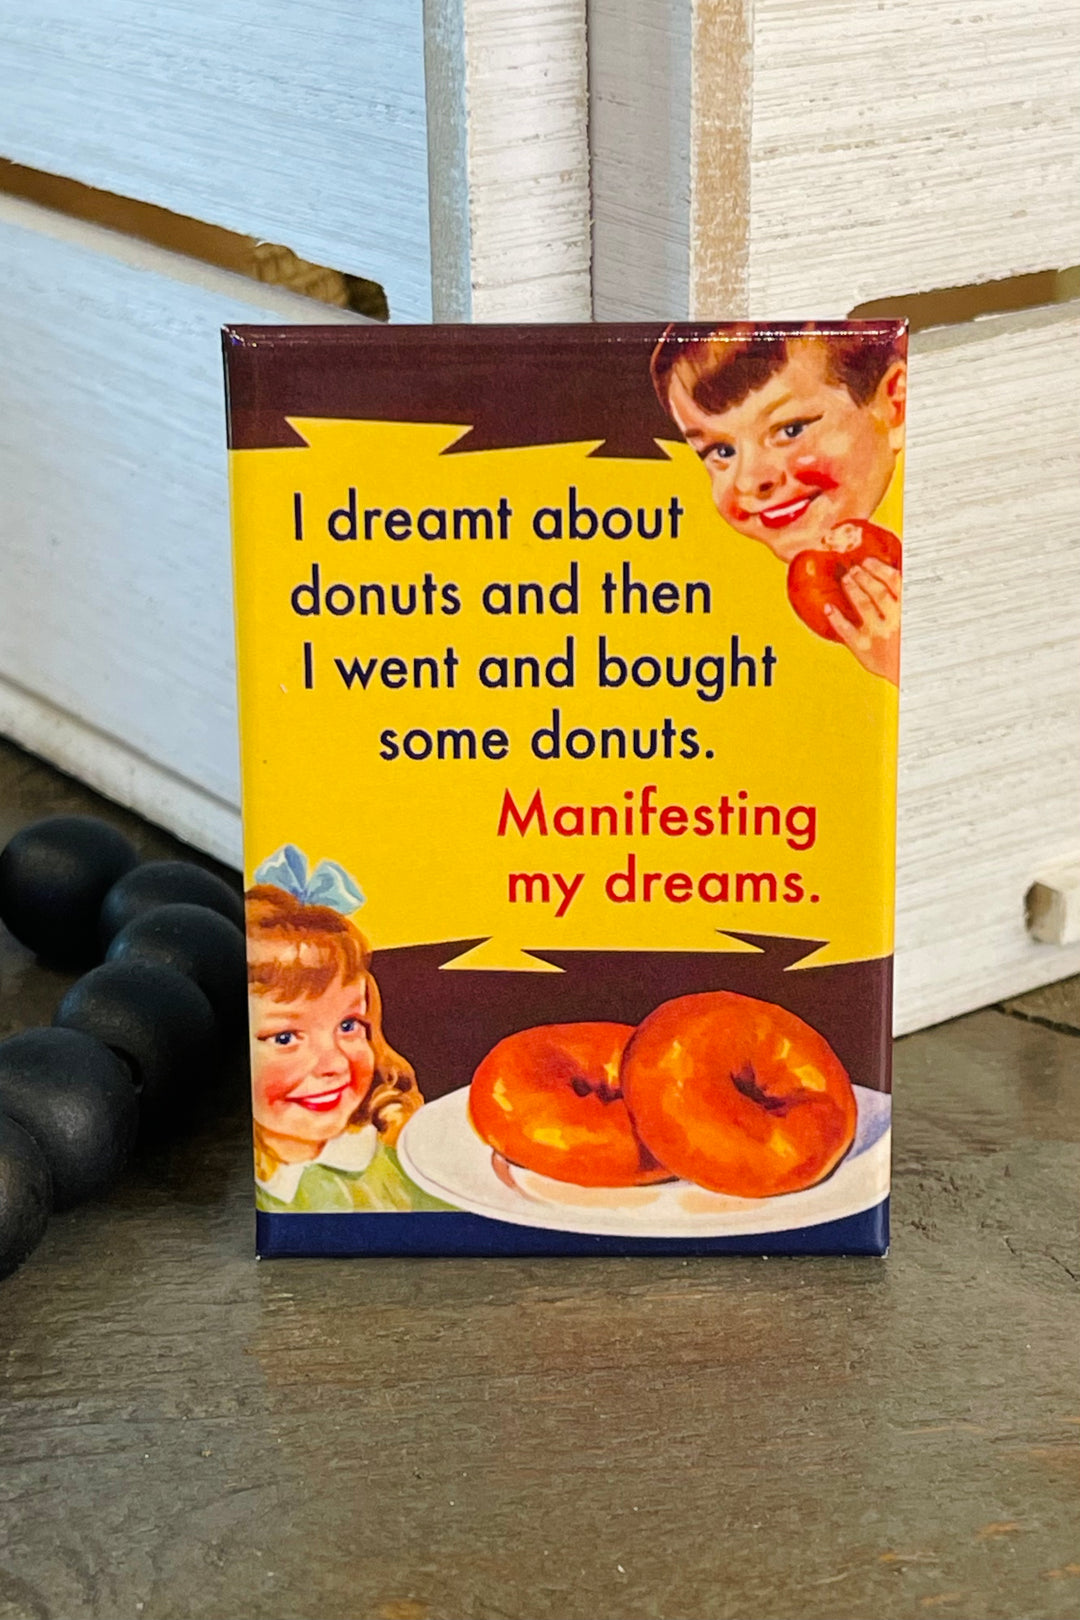 MAGNET: I dreamt about donuts